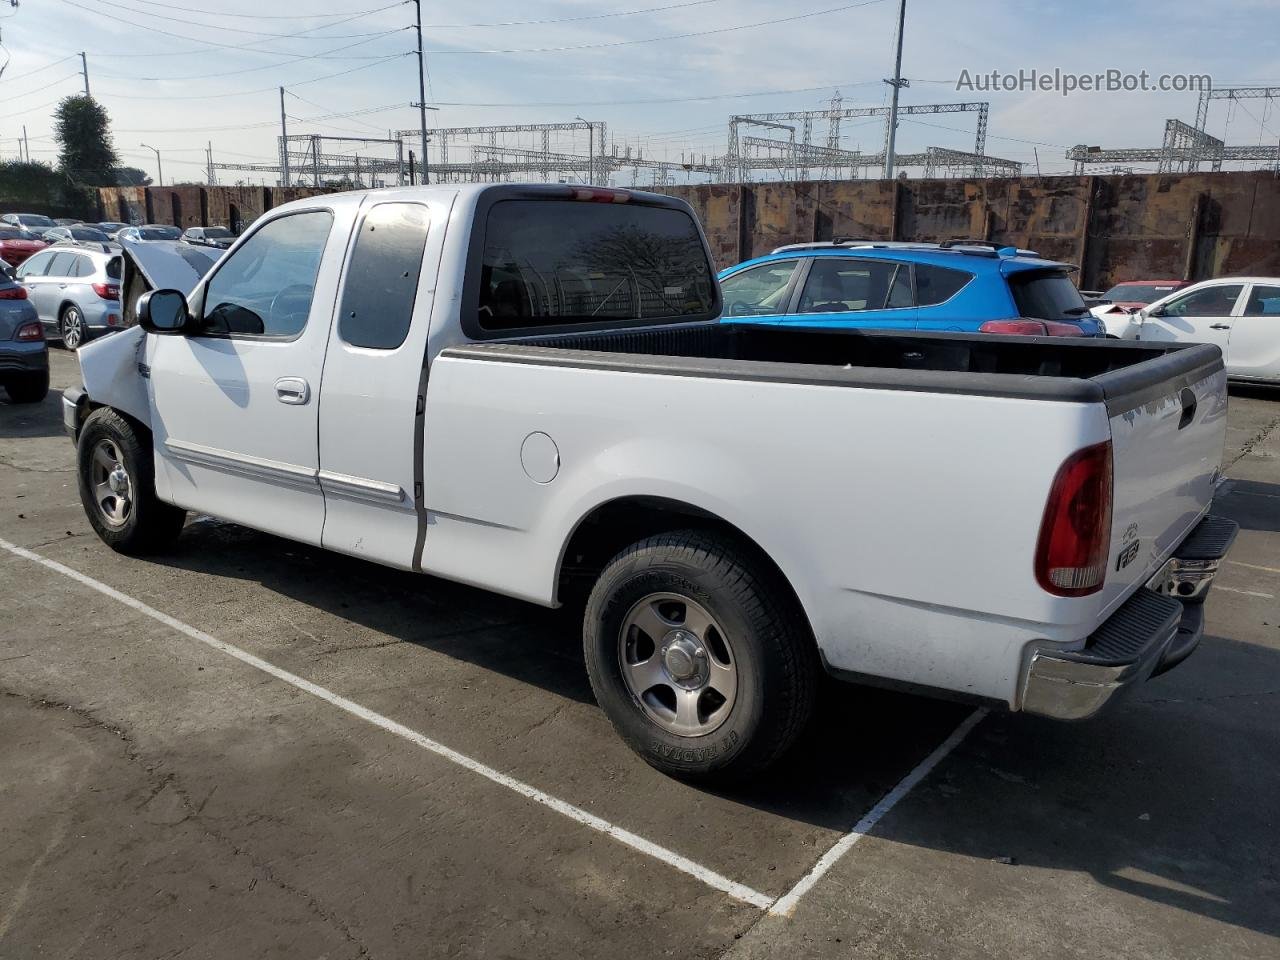 2001 Ford F150  Белый vin: 1FTZX17241NB04558